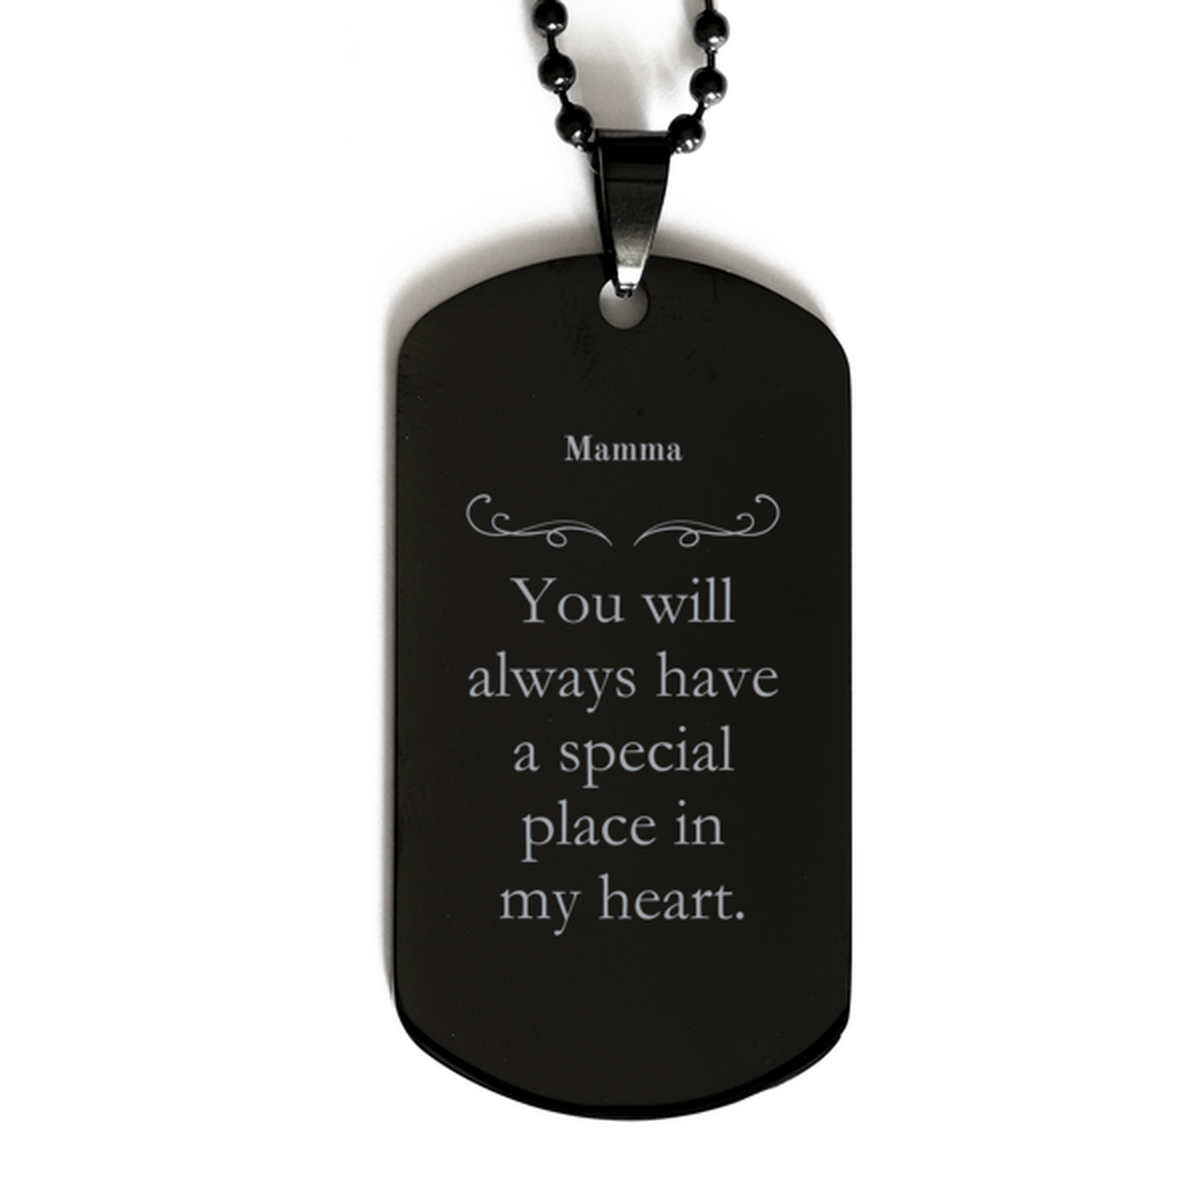 Engraved Black Dog Tag for Mom - Mamma, Always in My Heart, Mothers Day Gift